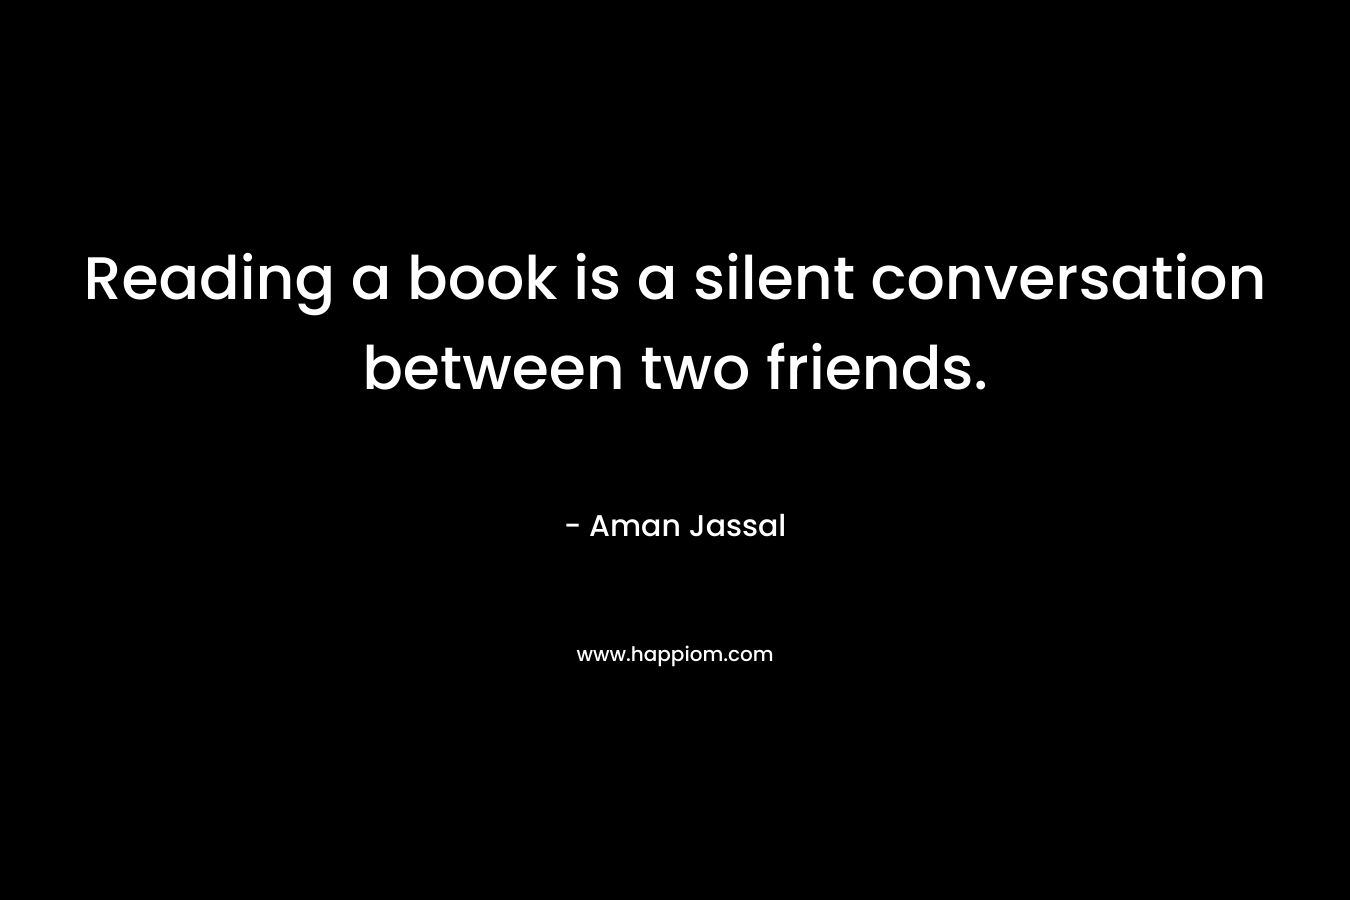 Reading a book is a silent conversation between two friends.